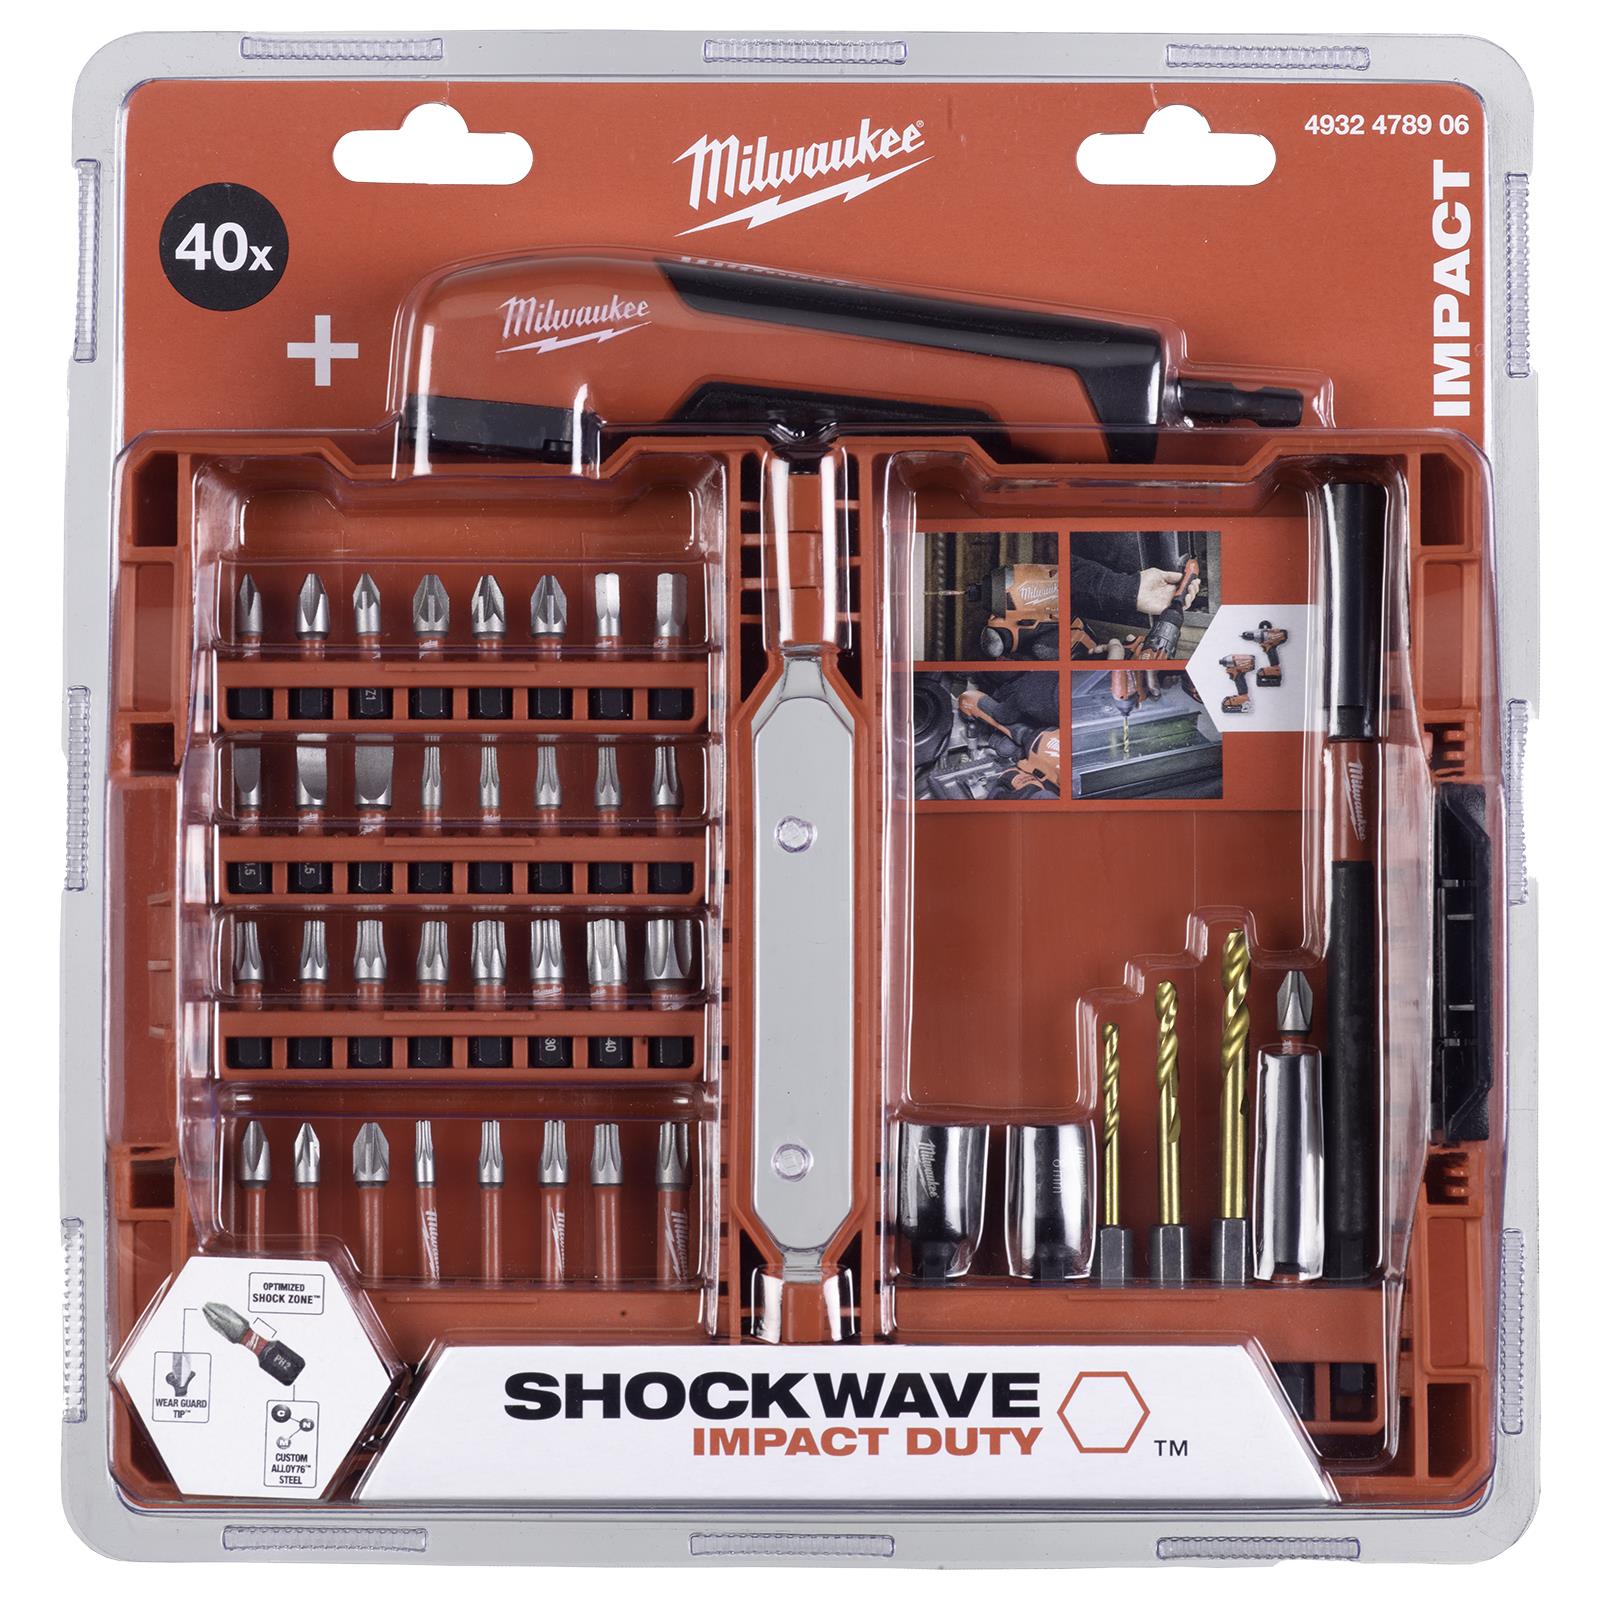 Milwaukee Shockwave Impact Duty Screwdriver Bit Set with Right Angle Attachment 41 Piece